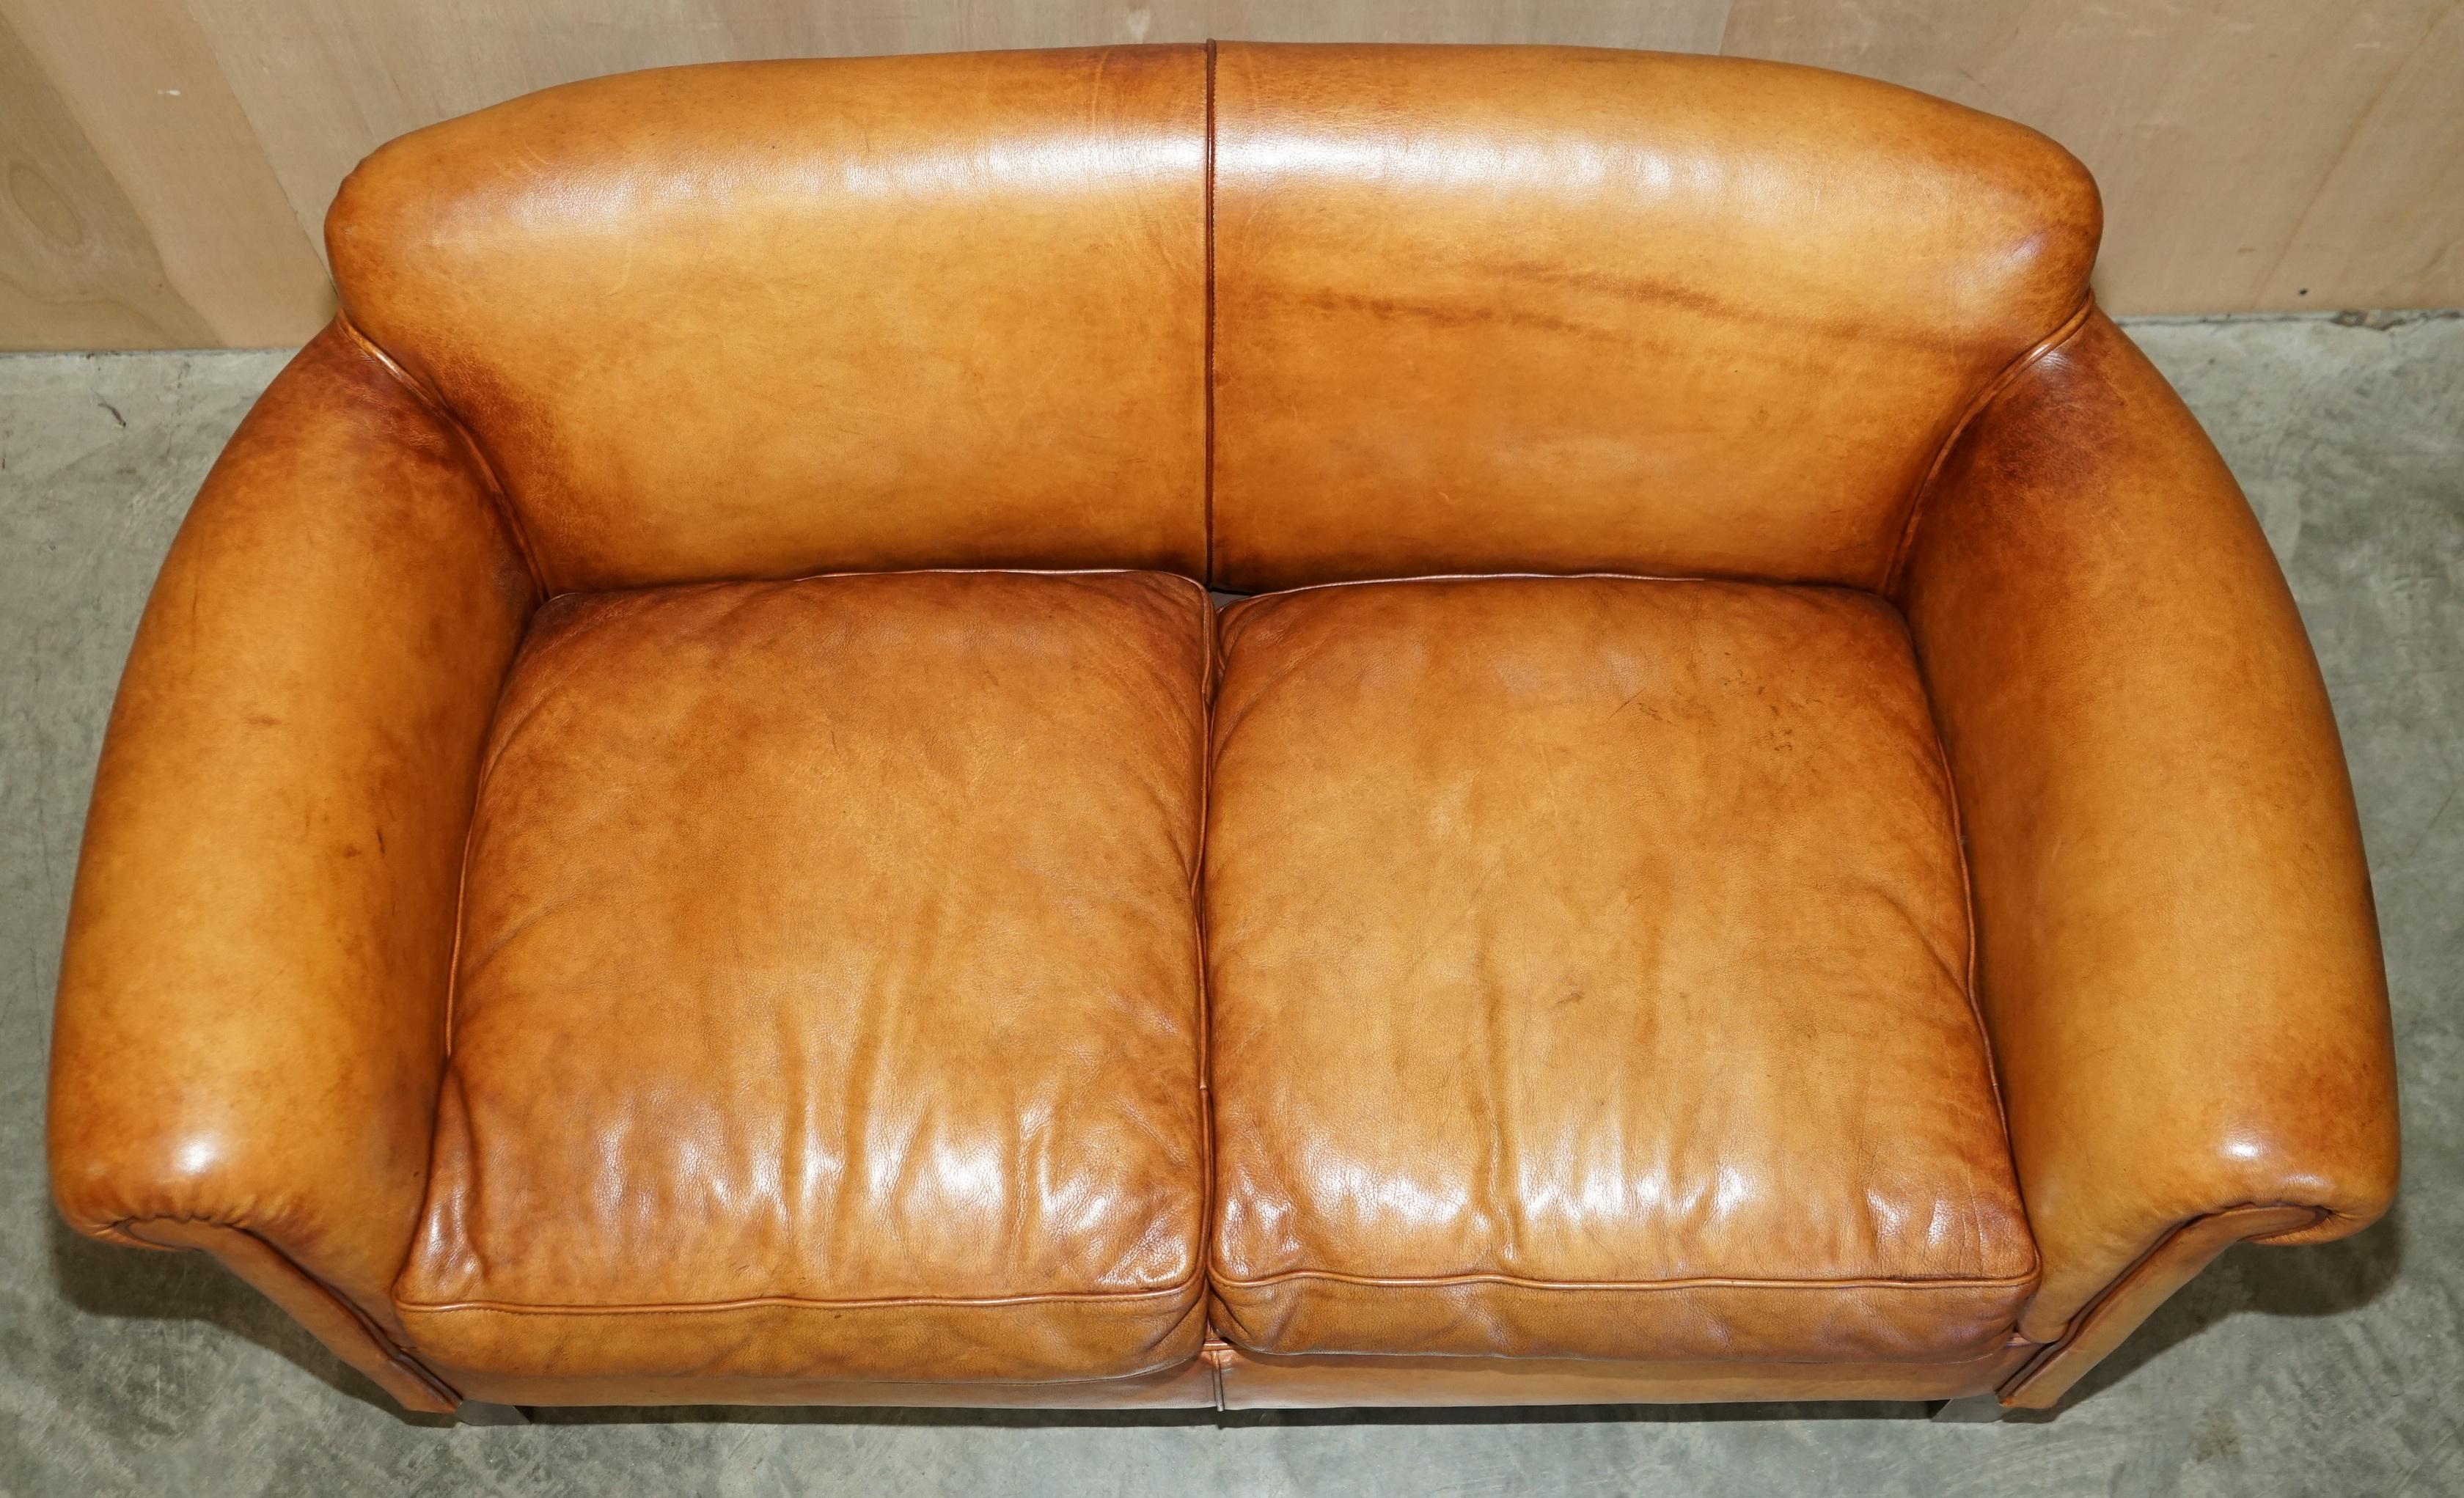 Rare John Lewis Camford Heritage Brown Leather Armchair & Two Seat Sofa Suite For Sale 7